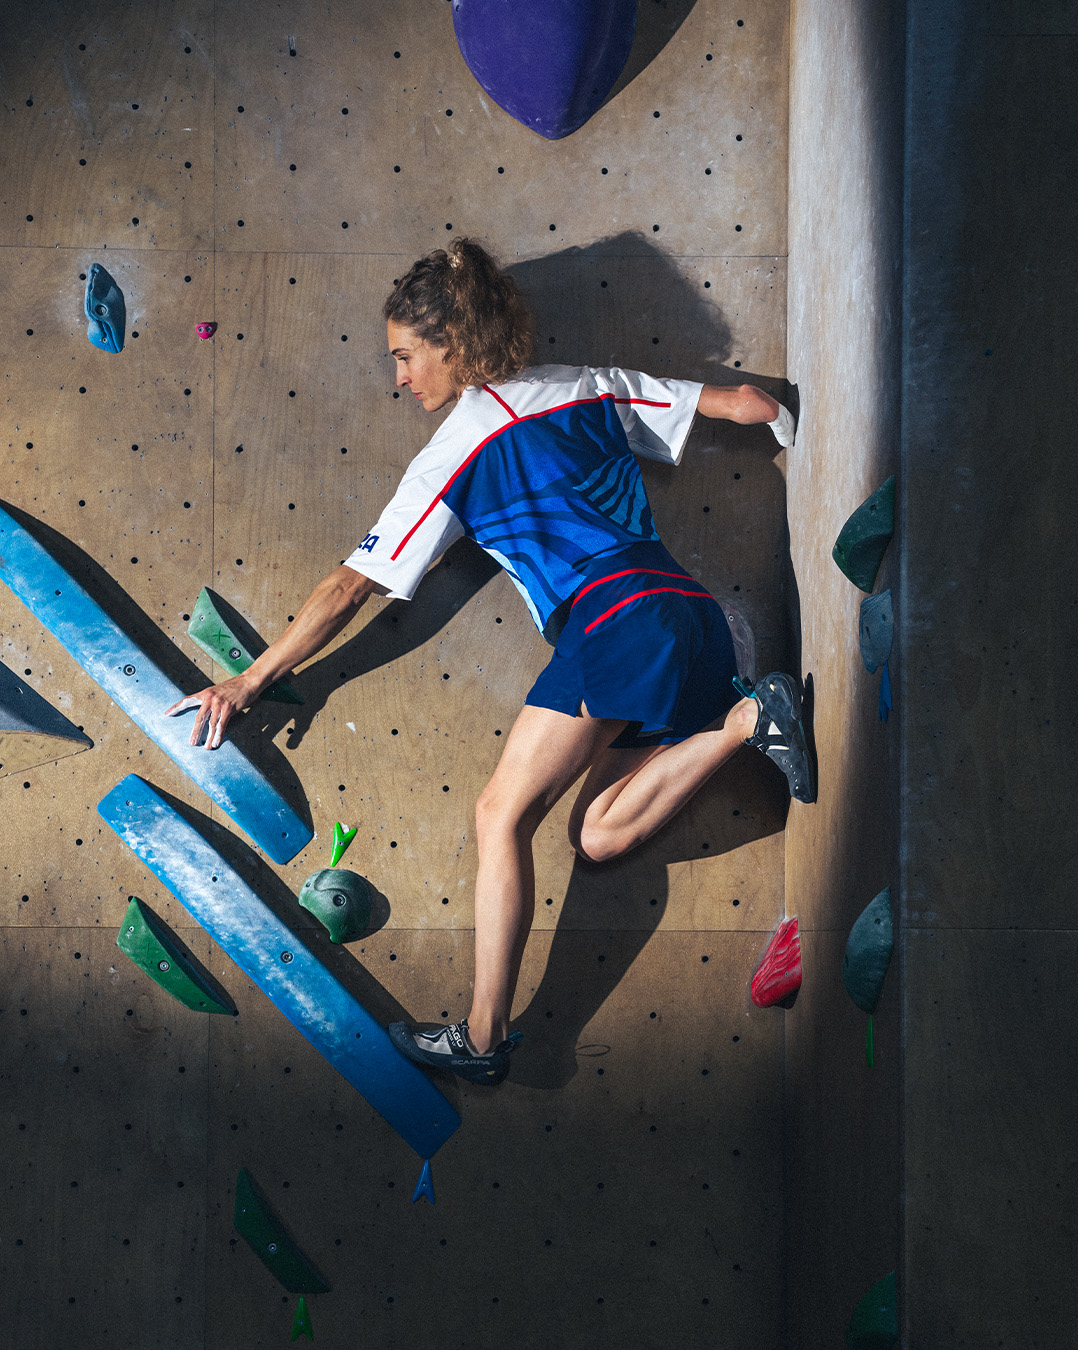 Woman indoor rock climbing, in athletic wear, focused on navigating the wall